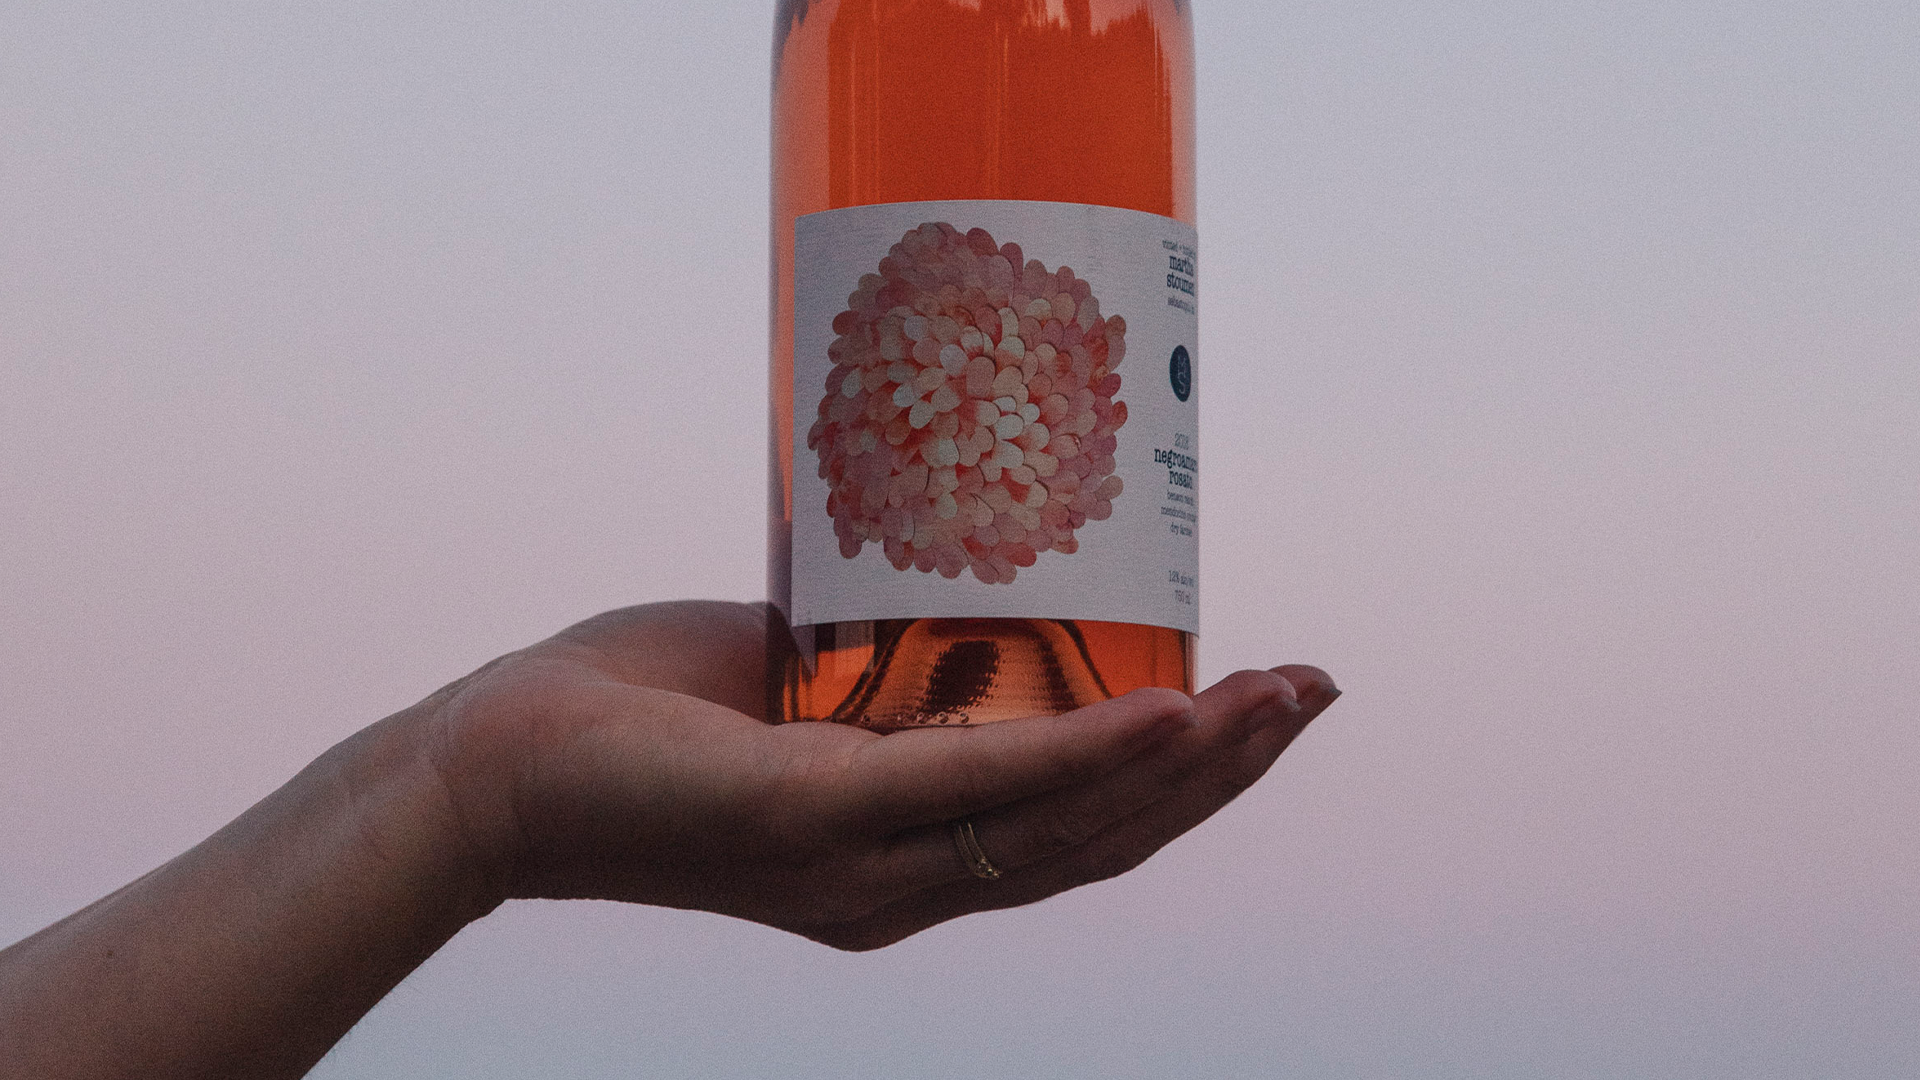 Cheers! We're giving away a fresh bottle every full moon!